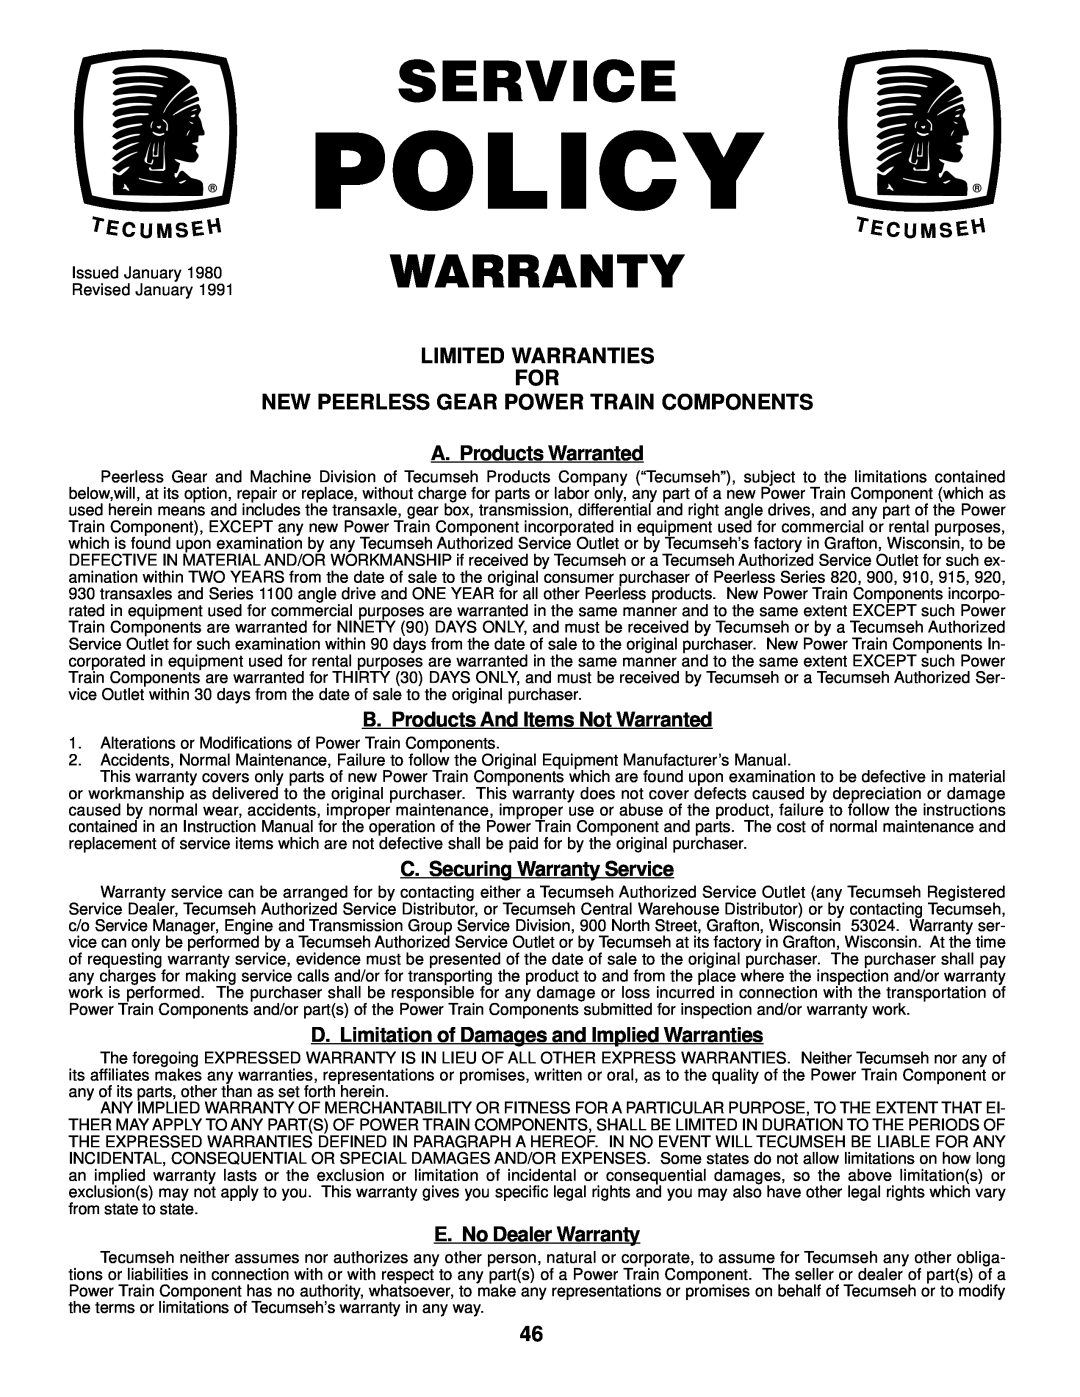 Weed Eater 177019 manual Limited Warranties, Policy, Service, Warranty 